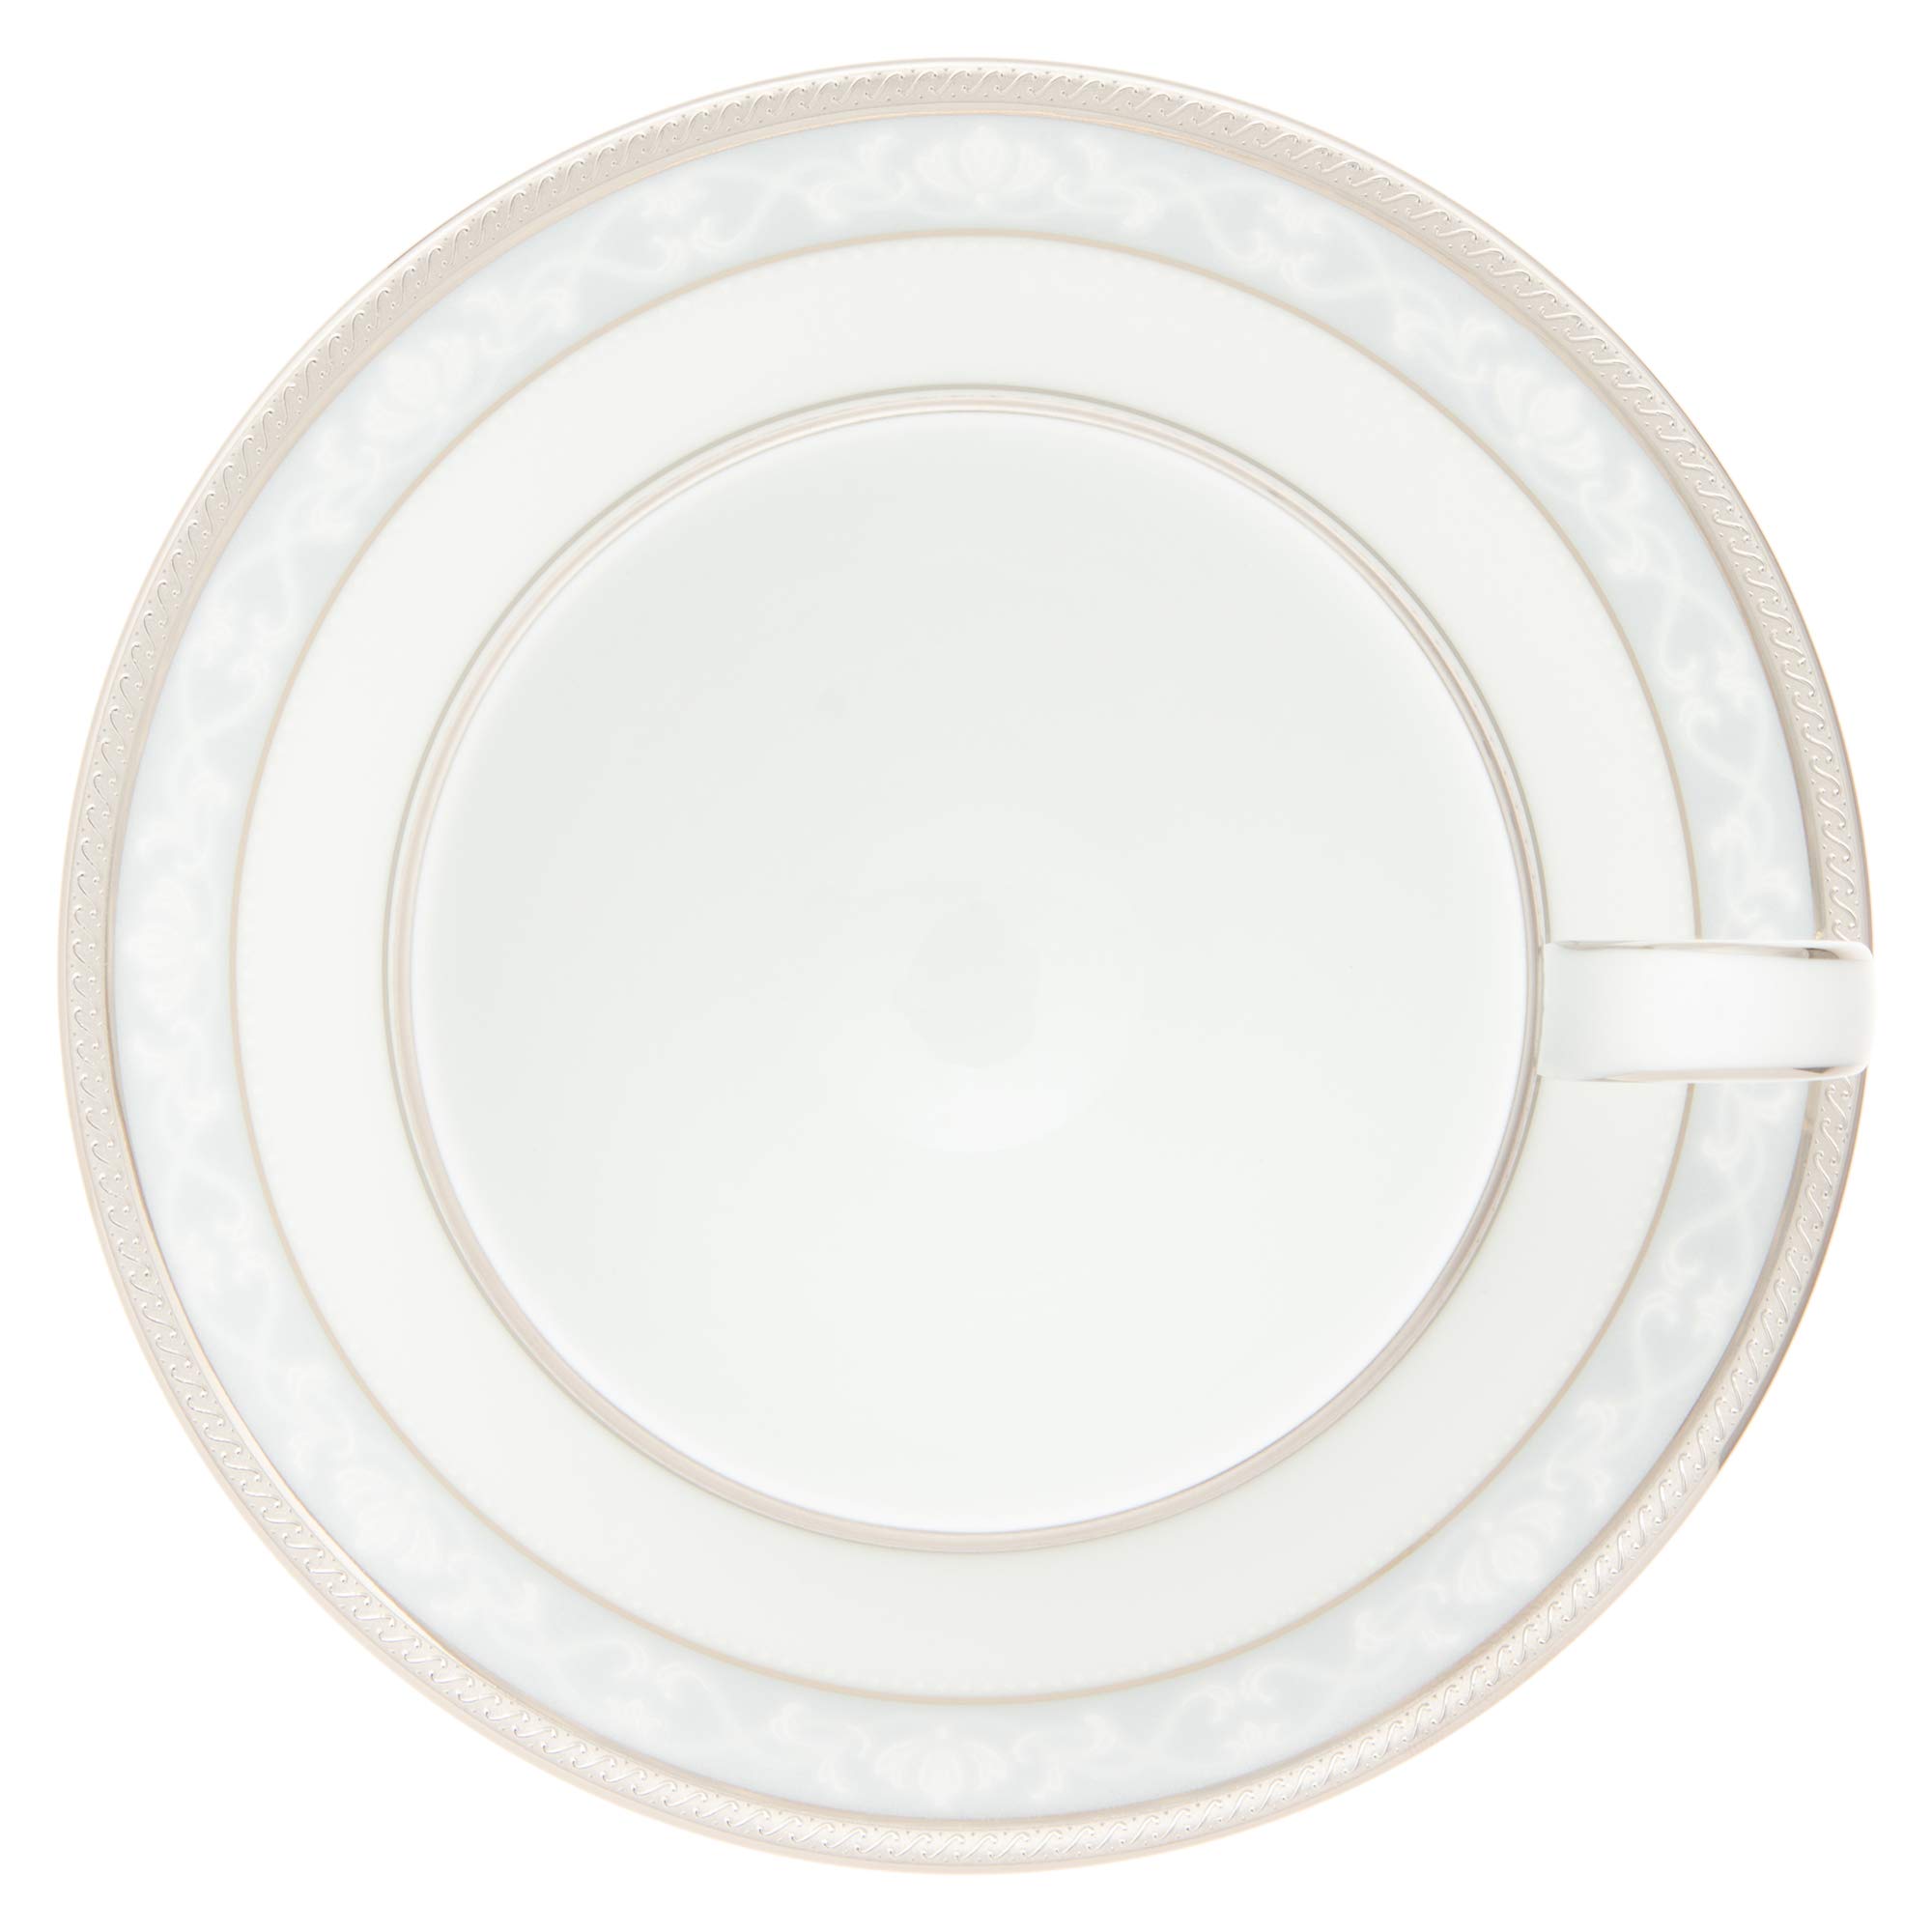 Noritake F91988/4336 Noritake Cup & Saucer Set (Can Be Used as Coffee and Tea, 8.5 fl oz (250 cc), Hampshire Platinum, 5 Servings, Fine Porcelain